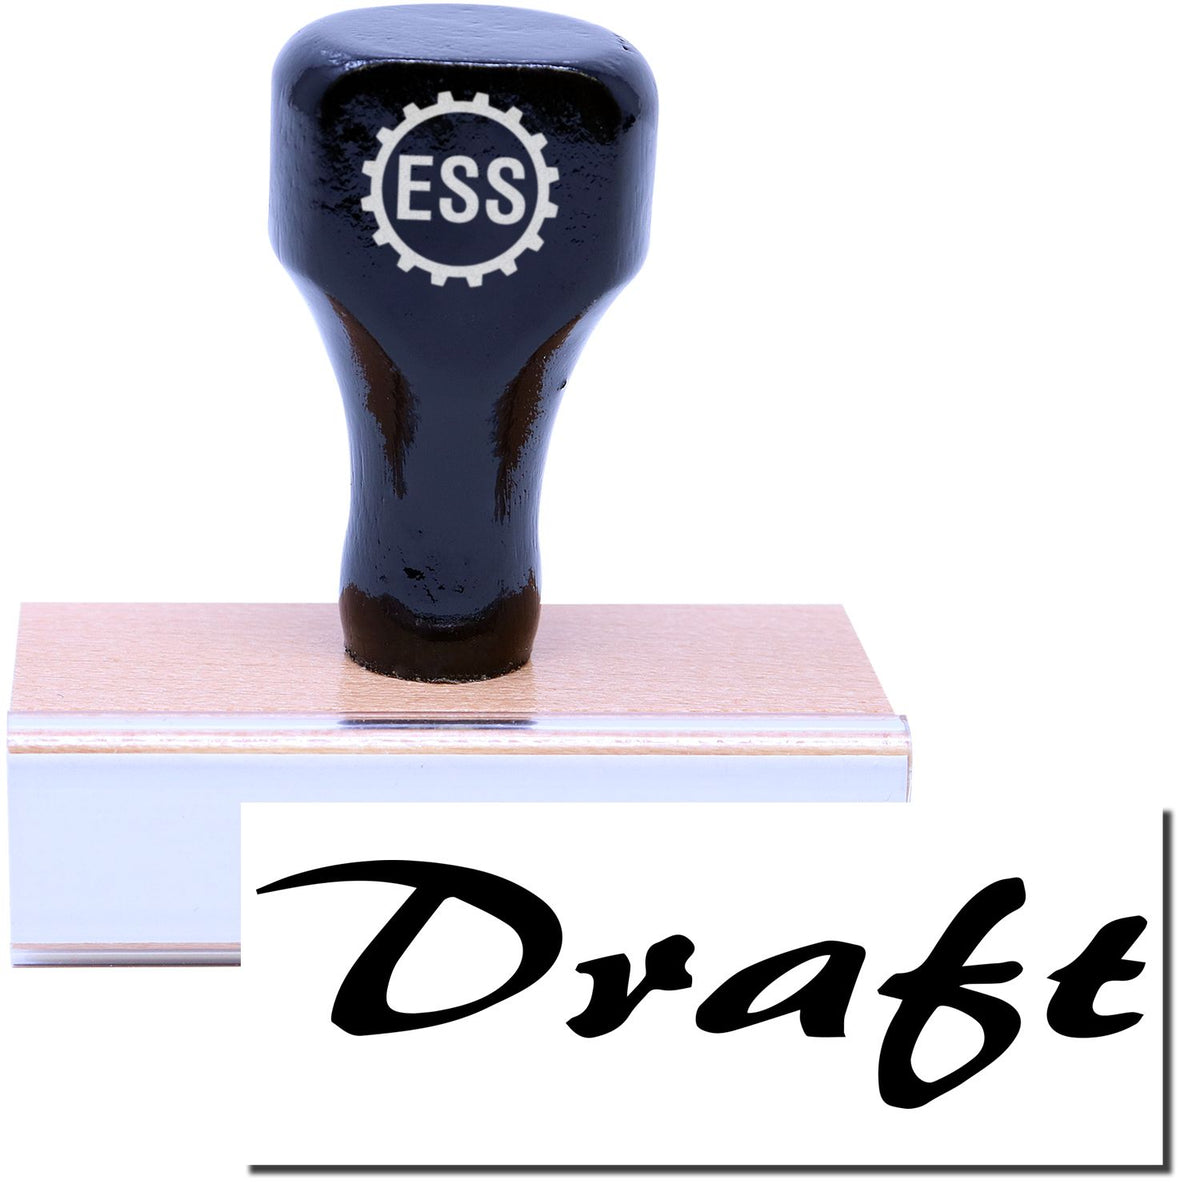 A stock office rubber stamp with a stamped image showing how the text &quot;Draft&quot; in a cursive font is displayed after stamping.